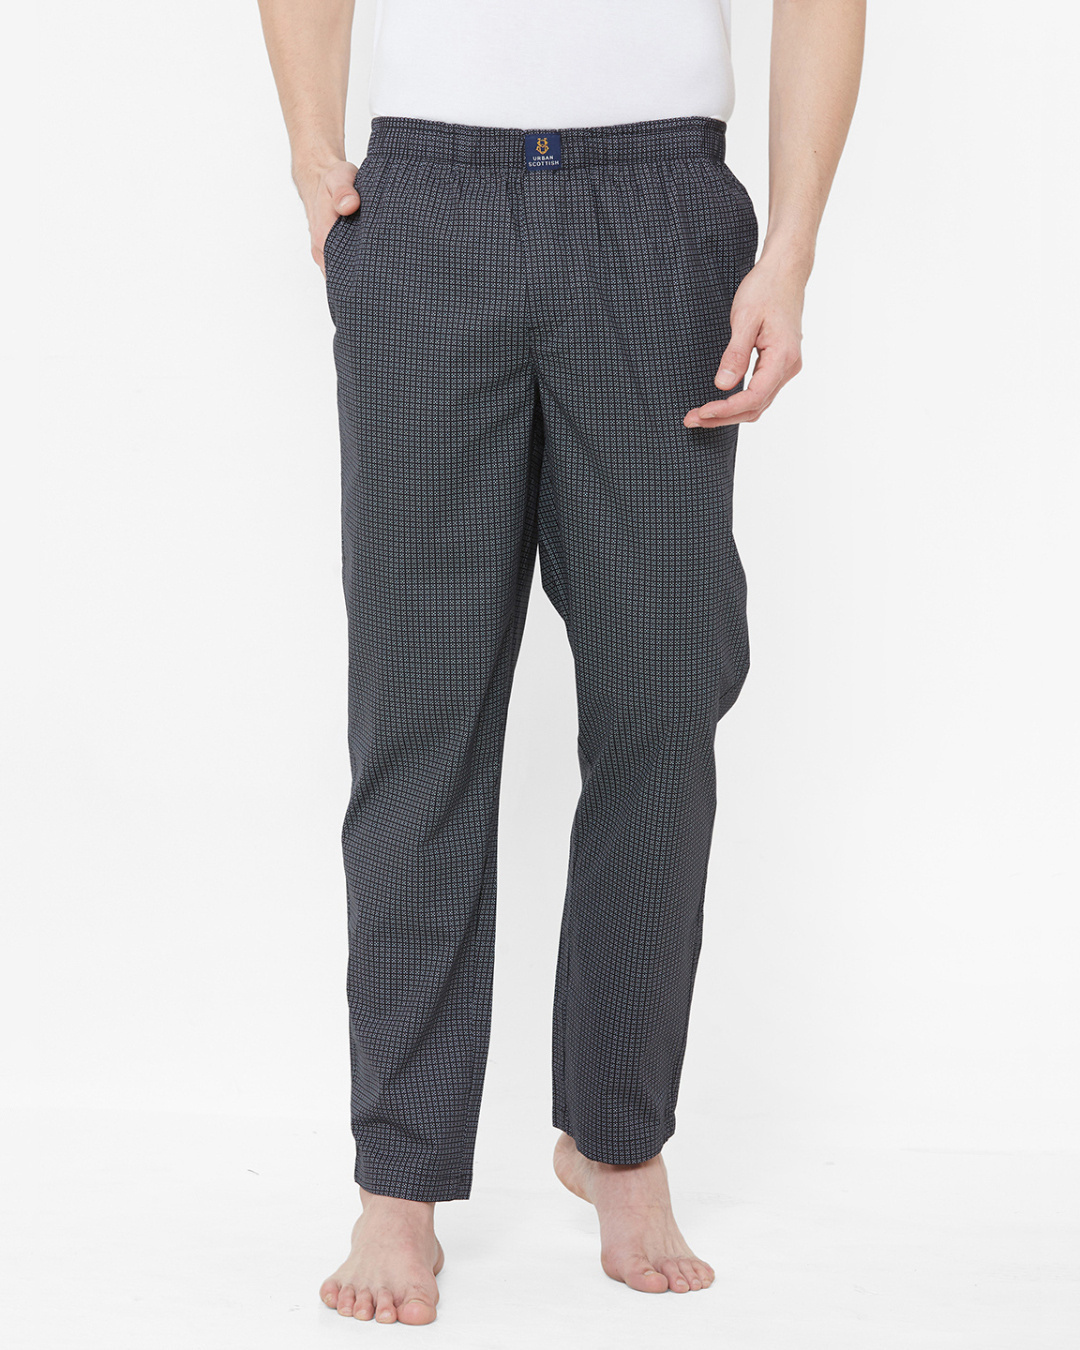 JOCKEY Checked Woven Lounge Pants | Lifestyle Stores | Puzhakkal | Thrissur